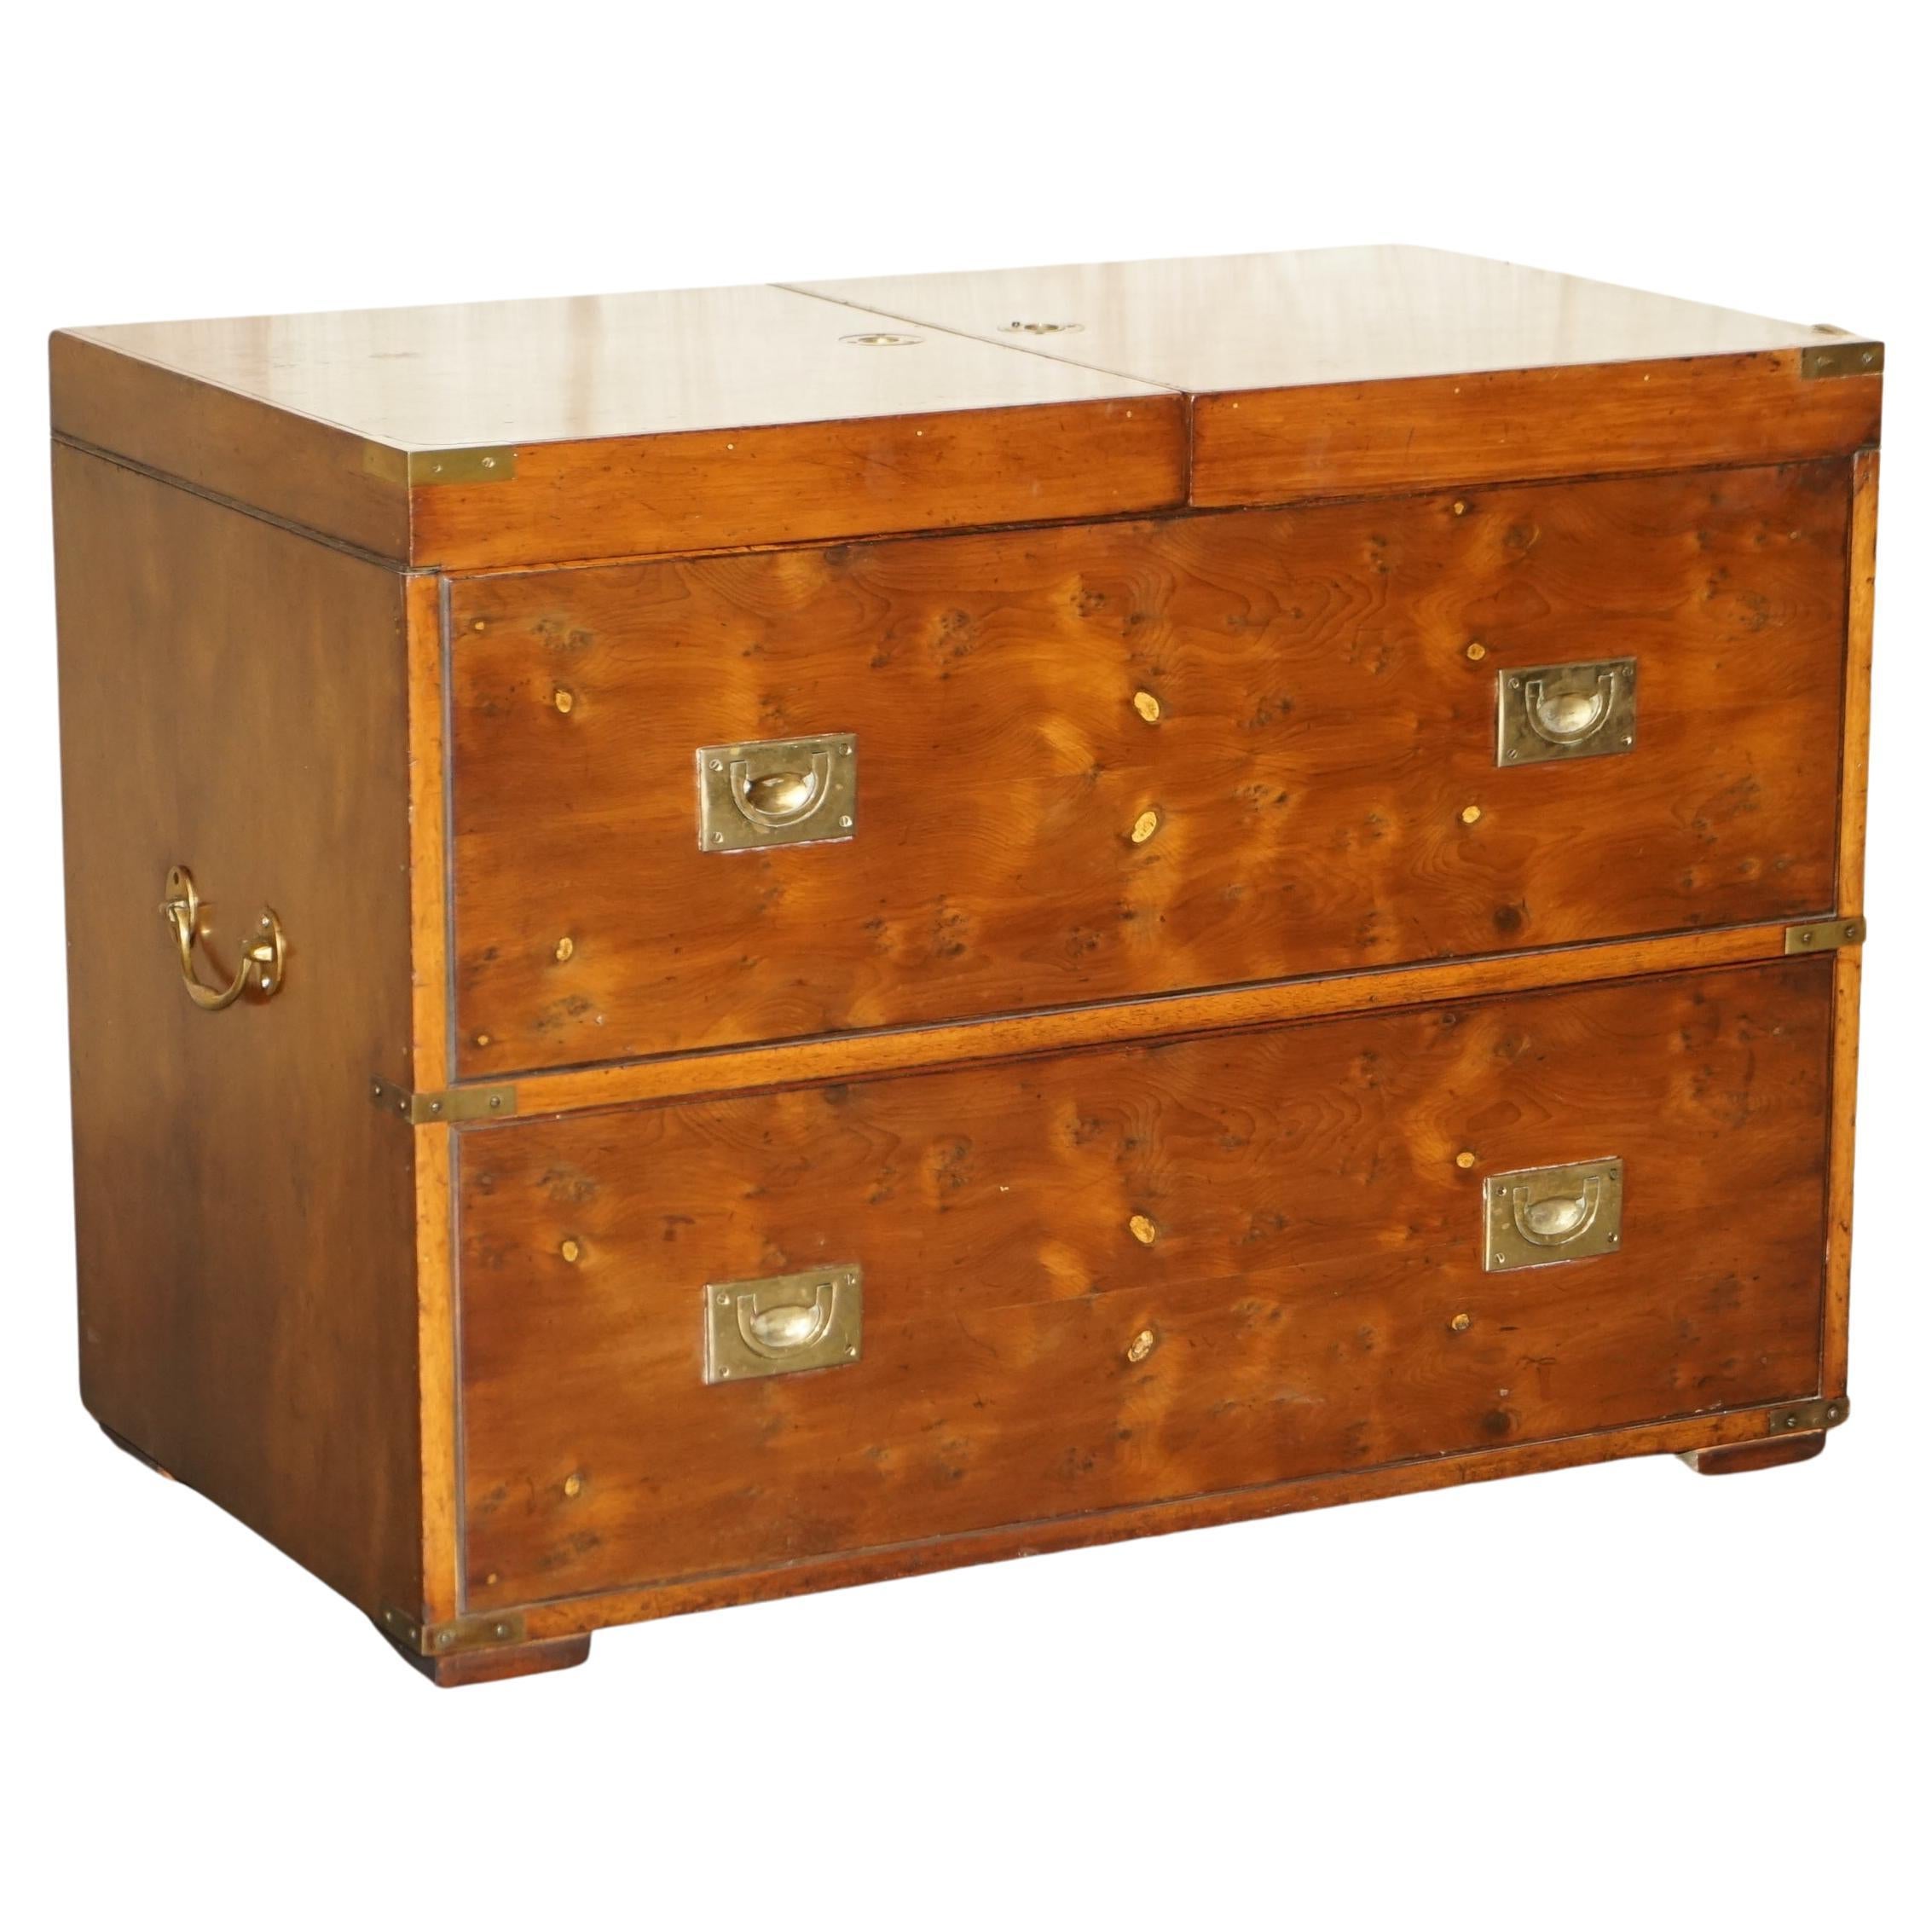 Burr Yew Wood Military Campaign Drinks Cabinet Hidden Inside a Chest Trunk